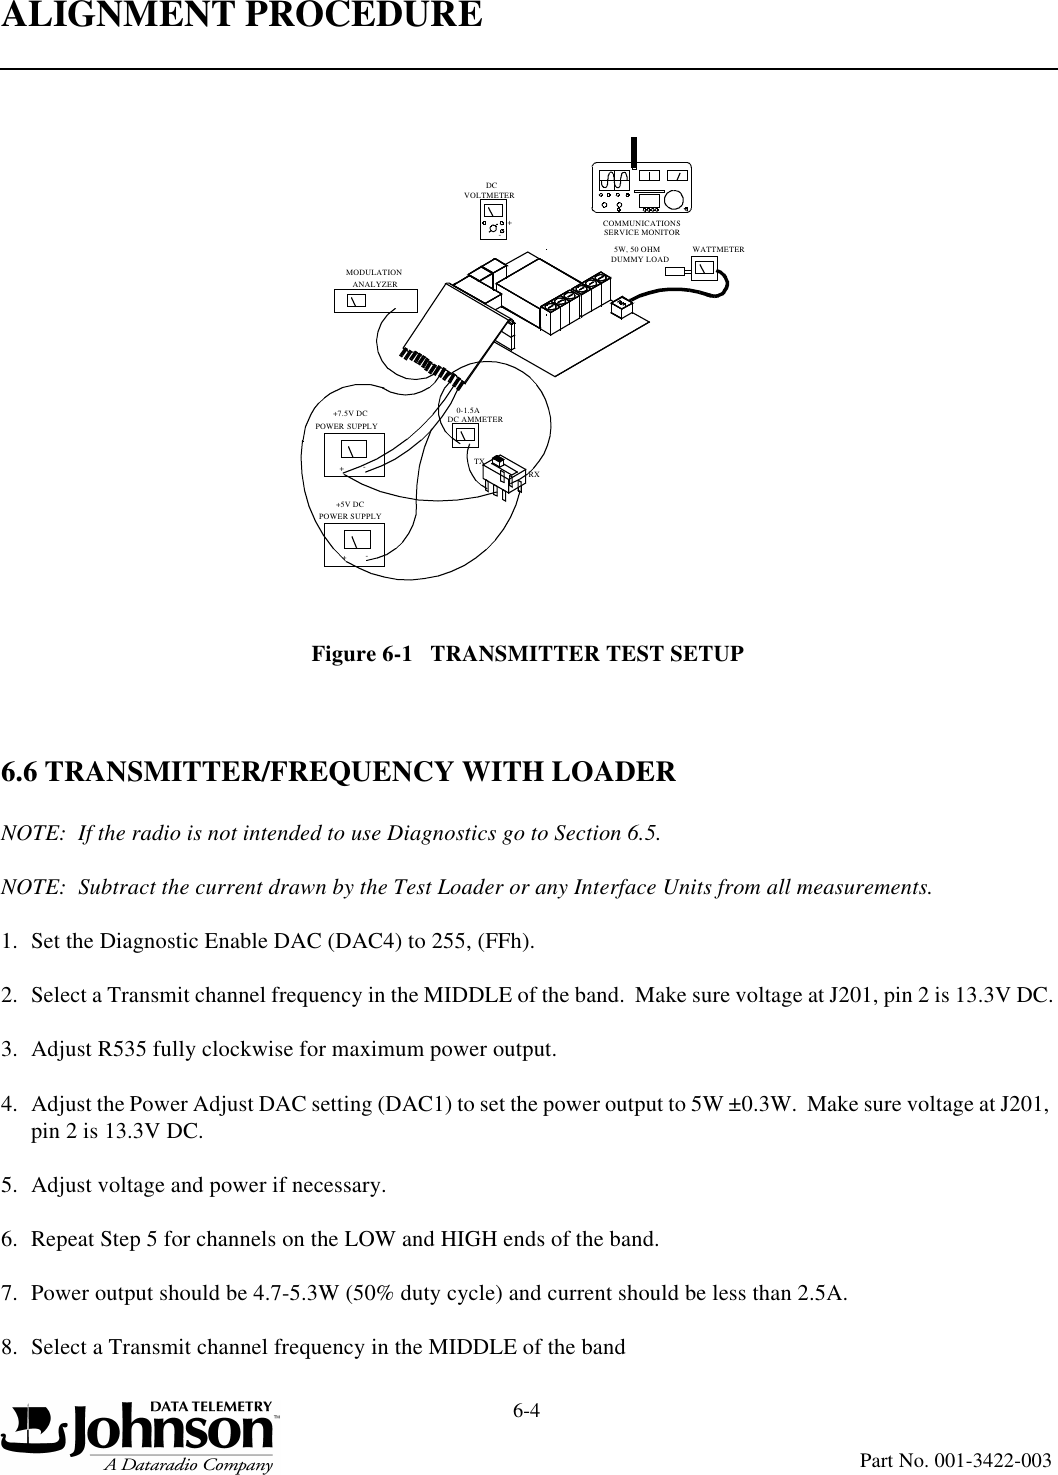 ALIGNMENT PROCEDURE6-4Part No. 001-3422-003Figure 6-1   TRANSMITTER TEST SETUP6.6 TRANSMITTER/FREQUENCY WITH LOADERNOTE:  If the radio is not intended to use Diagnostics go to Section 6.5.NOTE:  Subtract the current drawn by the Test Loader or any Interface Units from all measurements.1. Set the Diagnostic Enable DAC (DAC4) to 255, (FFh).2. Select a Transmit channel frequency in the MIDDLE of the band.  Make sure voltage at J201, pin 2 is 13.3V DC.3. Adjust R535 fully clockwise for maximum power output.4. Adjust the Power Adjust DAC setting (DAC1) to set the power output to 5W ±0.3W.  Make sure voltage at J201, pin 2 is 13.3V DC.5. Adjust voltage and power if necessary.6. Repeat Step 5 for channels on the LOW and HIGH ends of the band.7. Power output should be 4.7-5.3W (50% duty cycle) and current should be less than 2.5A.8. Select a Transmit channel frequency in the MIDDLE of the bandPOWER SUPPLY+7.5V DCPOWER SUPPLY+5V DC+-TXRXVOLTMETERDC+-WATTMETER5W, 50 OHMDUMMY LOADCOMMUNICATIONSSERVICE MONITOR0-1.5ADC AMMETER+-ANALYZERMODULATION